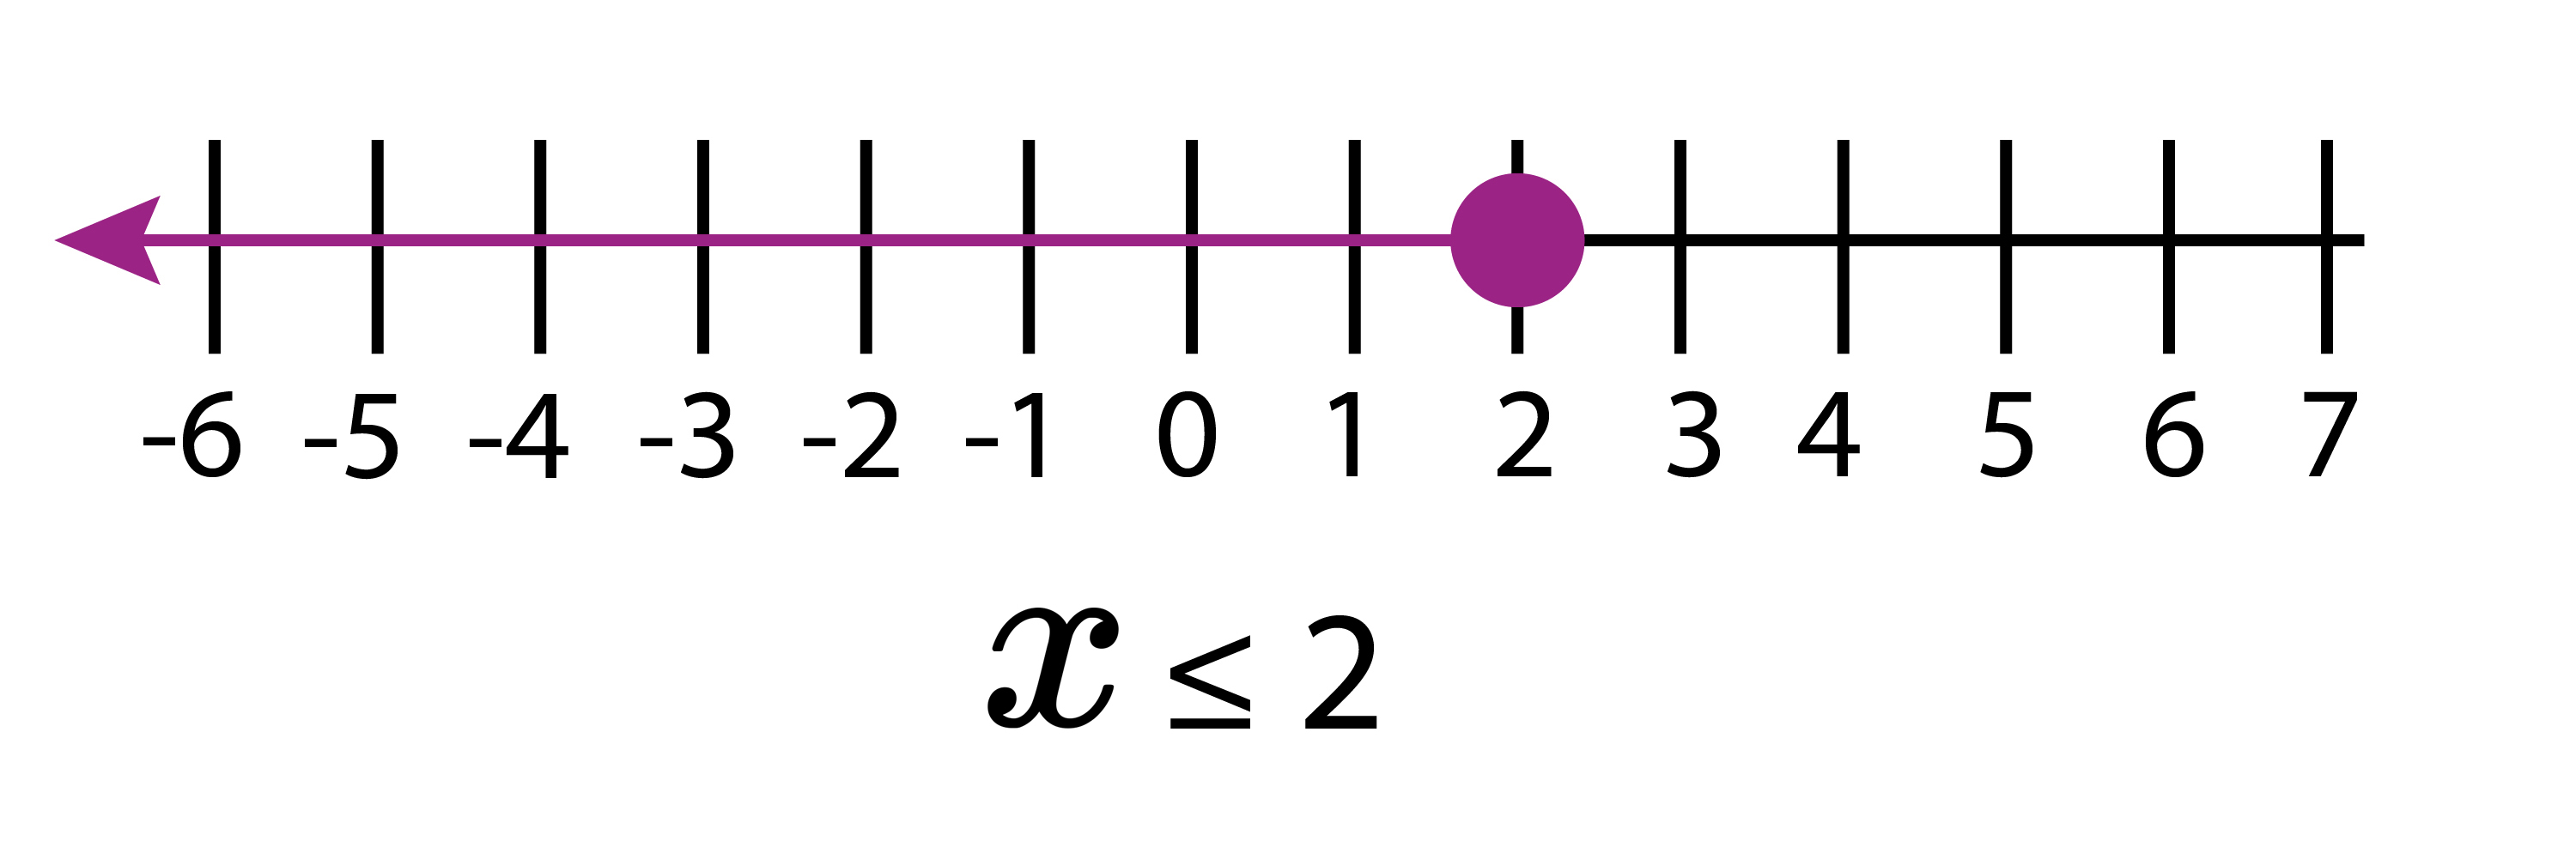 On the number line x is less than or equal to 2